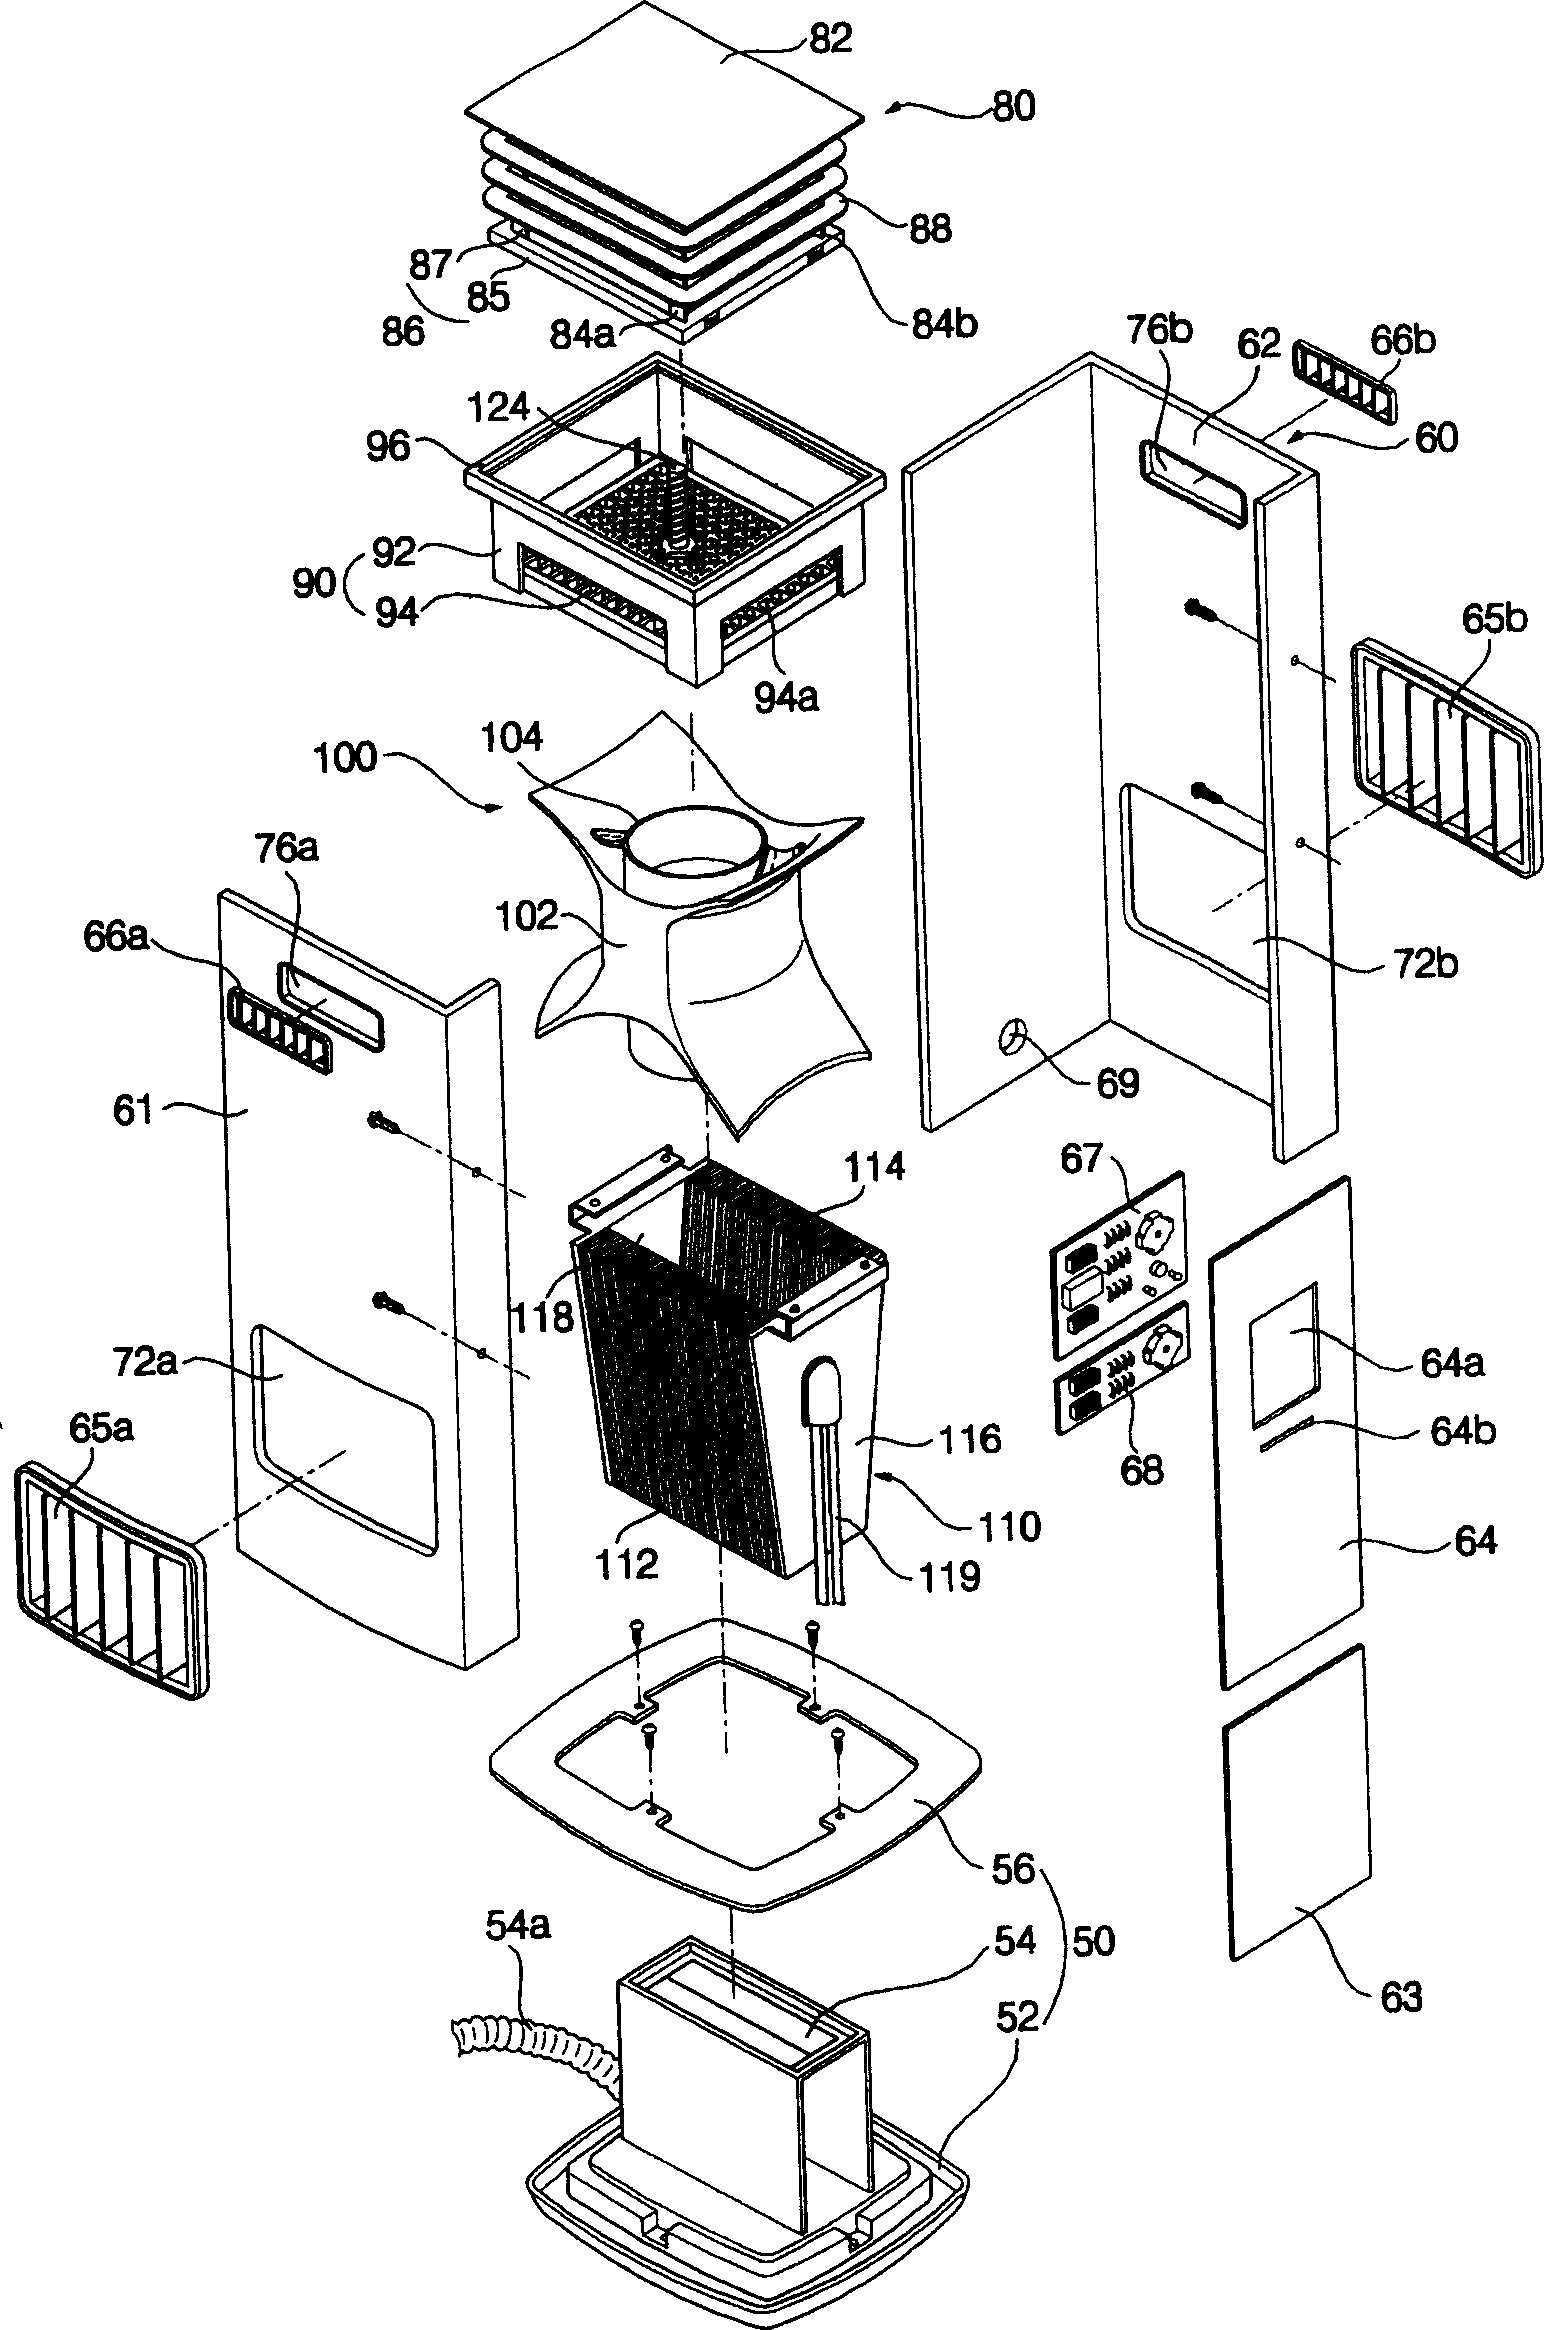 Lift device of outlet assembly of air conditioner